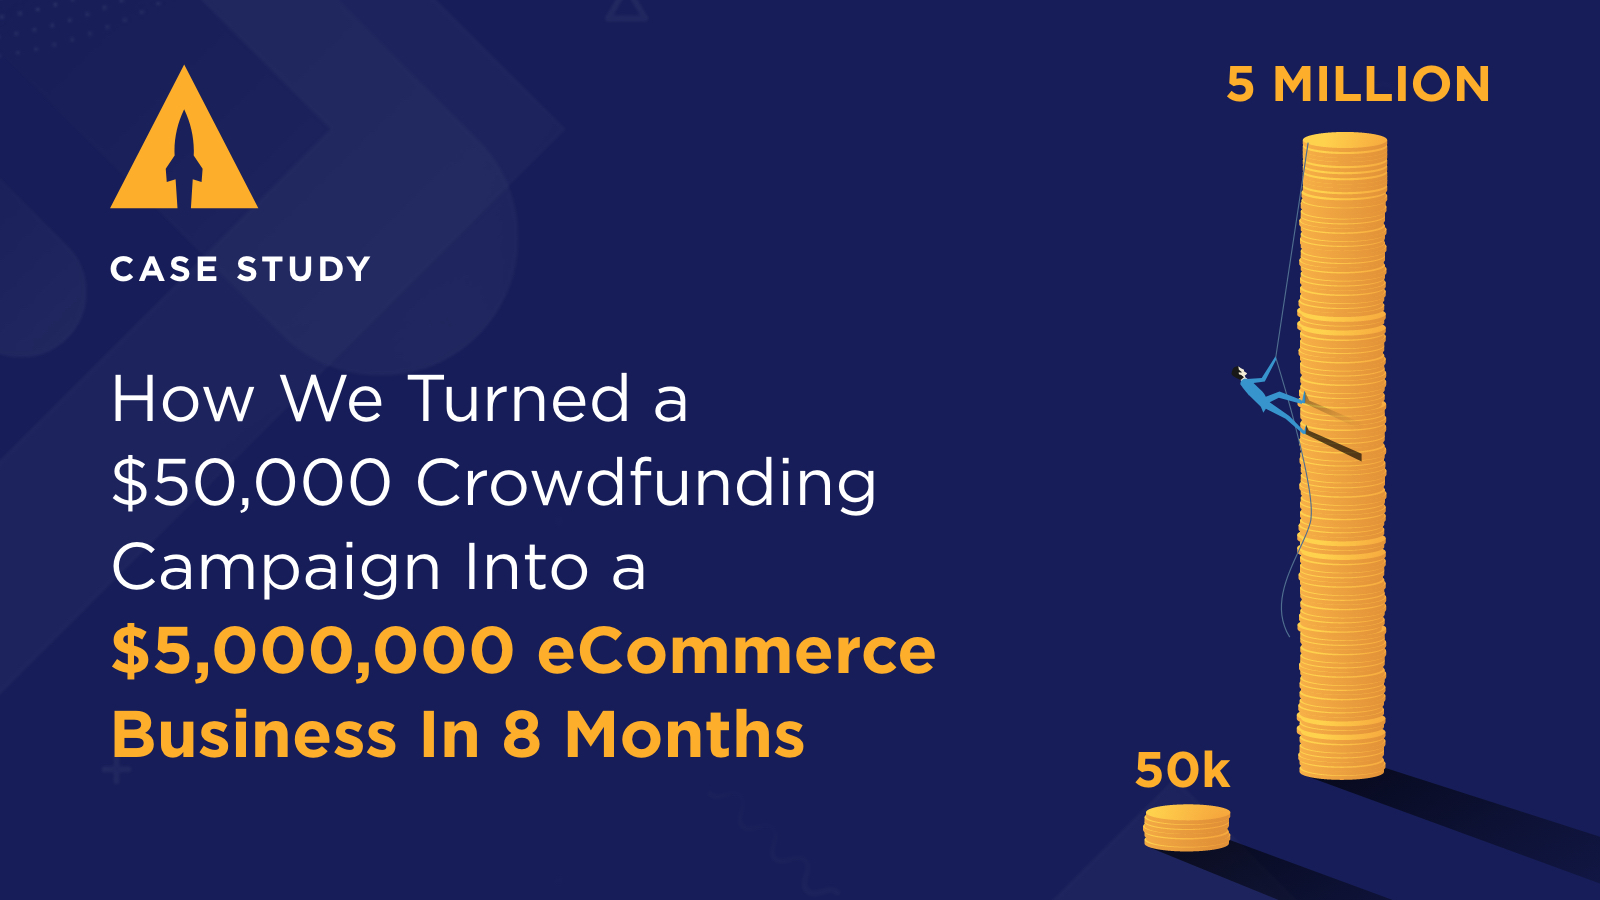 How we turned a $50,000 crowdfunding campaign into a $5,000,000 eCommerce business in 8 months